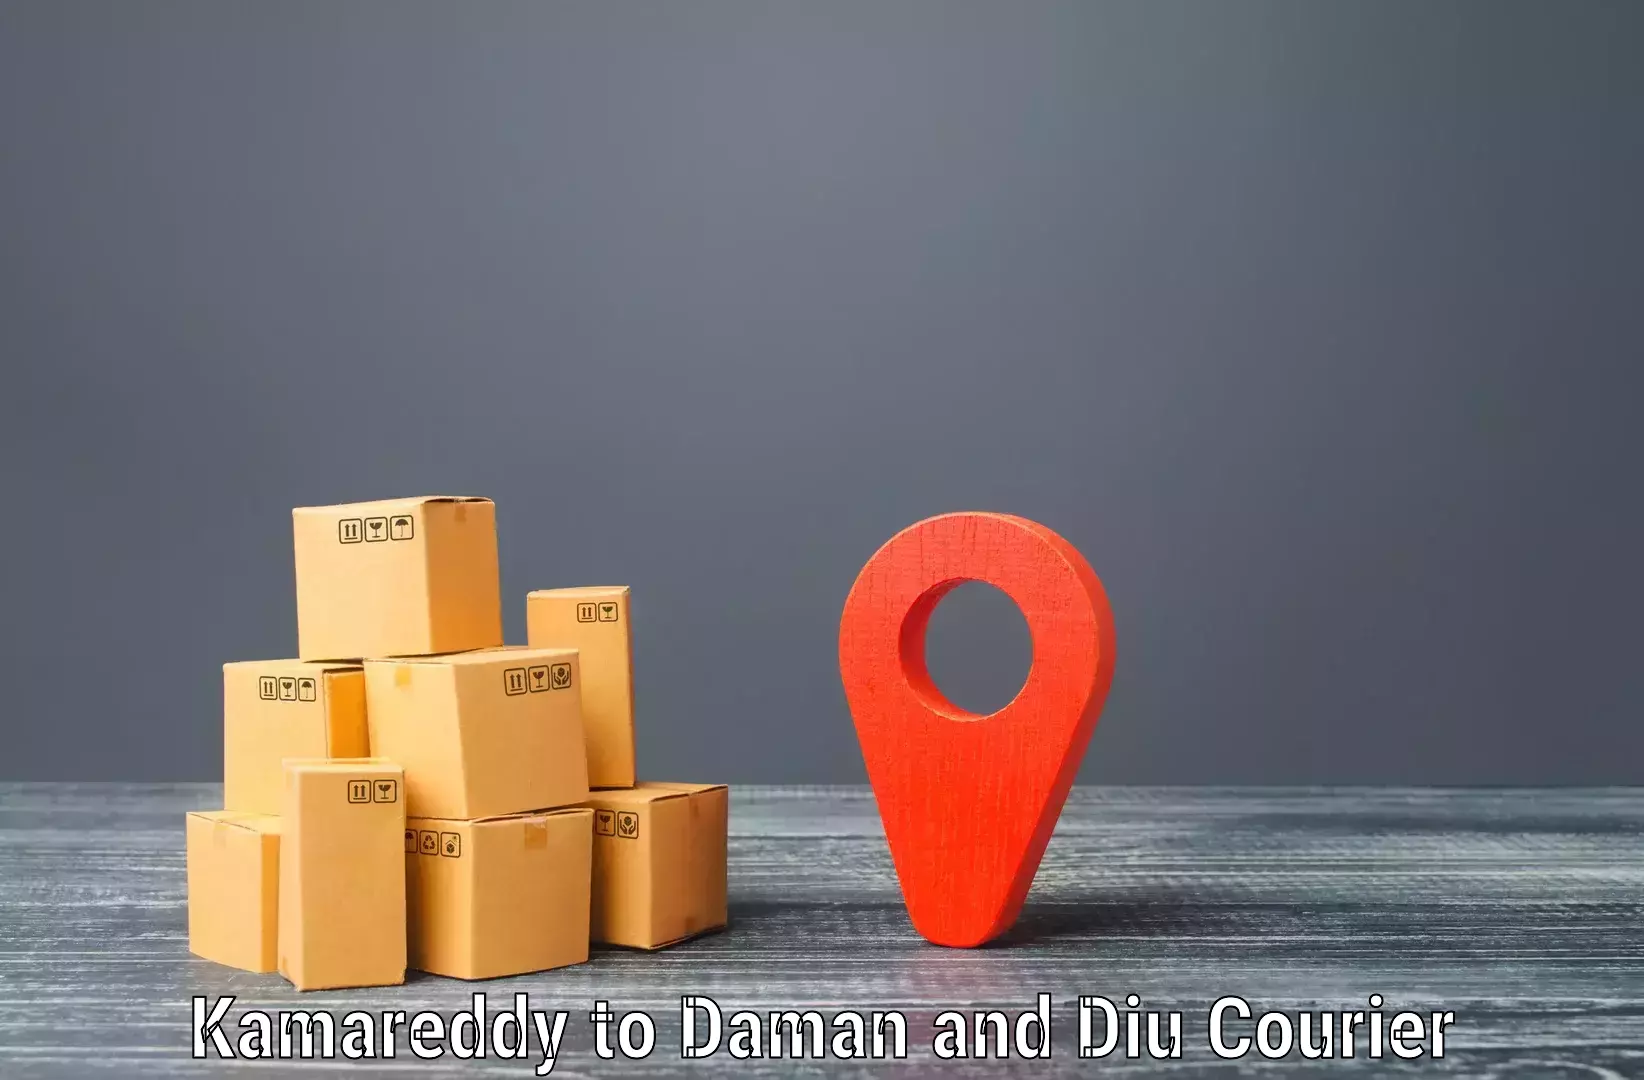 Global courier networks Kamareddy to Daman and Diu